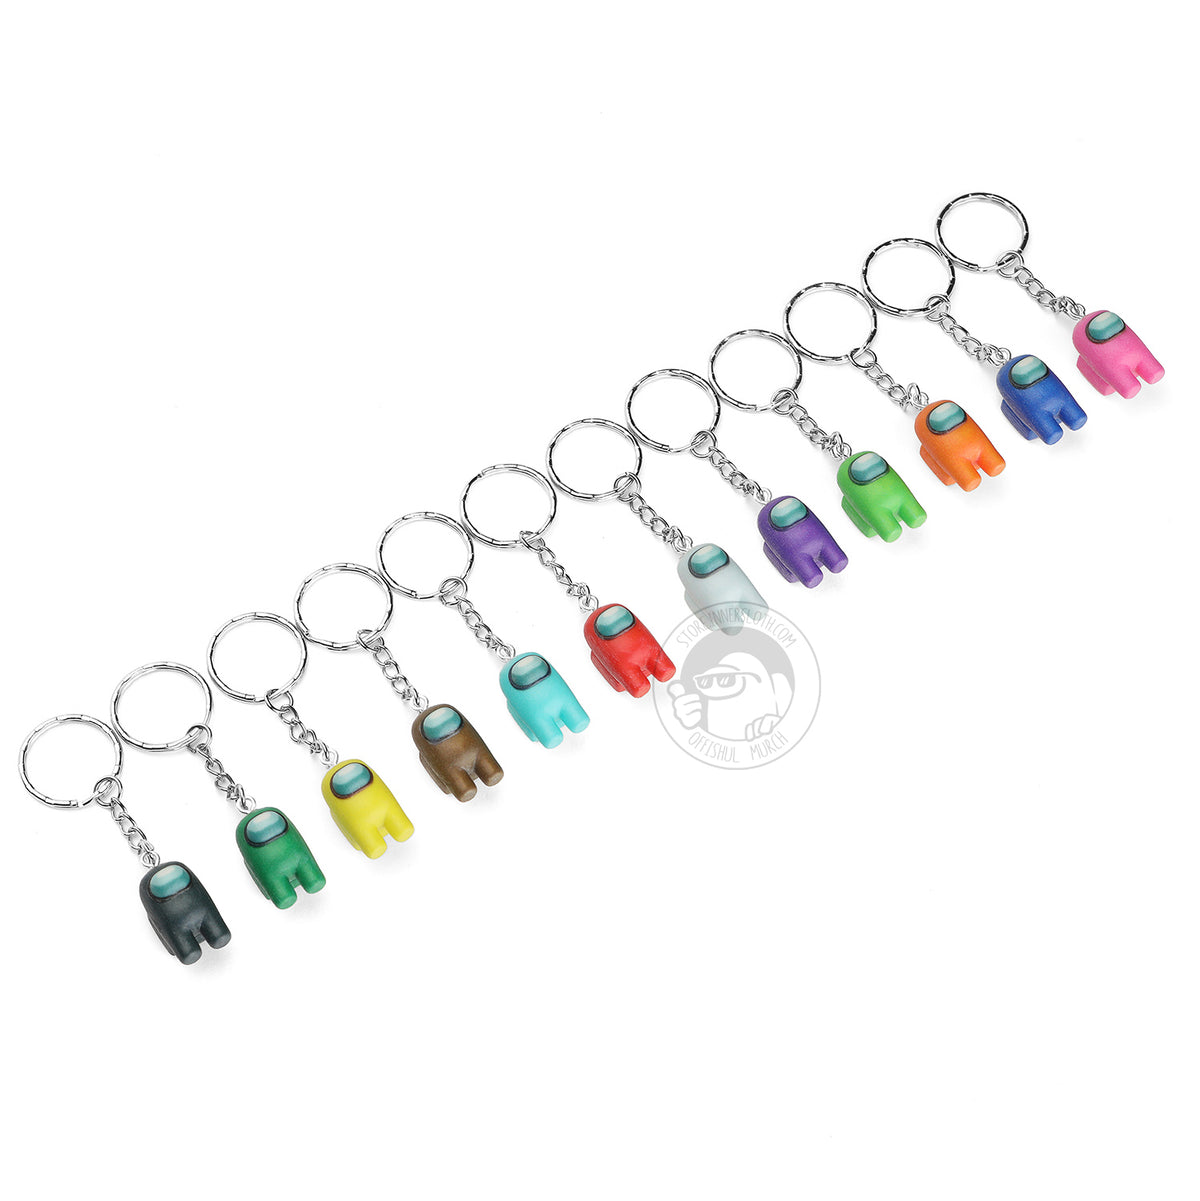 A product photo of all twelve variant colors of the Among Us: Crewmate Keychain by Objex Unlimited Inc. They are laying diagonally across the photo and each has a silver keychain. The colors are as follows: black, green, yellow, brown, cyan, red, white, purple, lime, orange, blue, and pink.